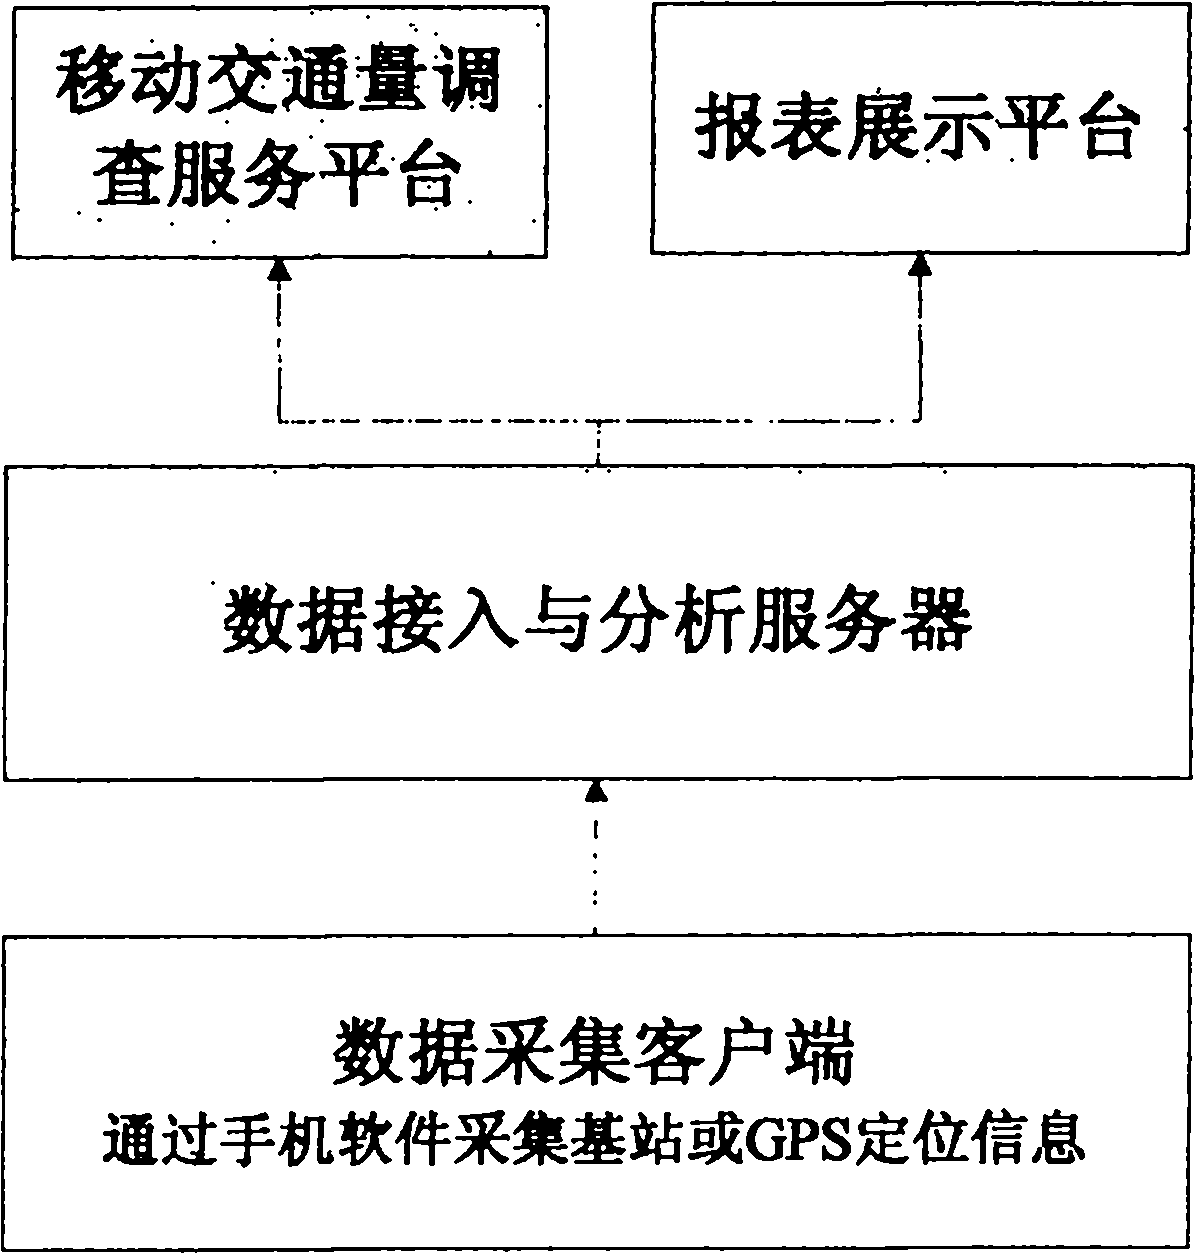 Method for bus origin-destination (OD) investigation by using mobile phone base station data and operating vehicle global position system (GPS) data